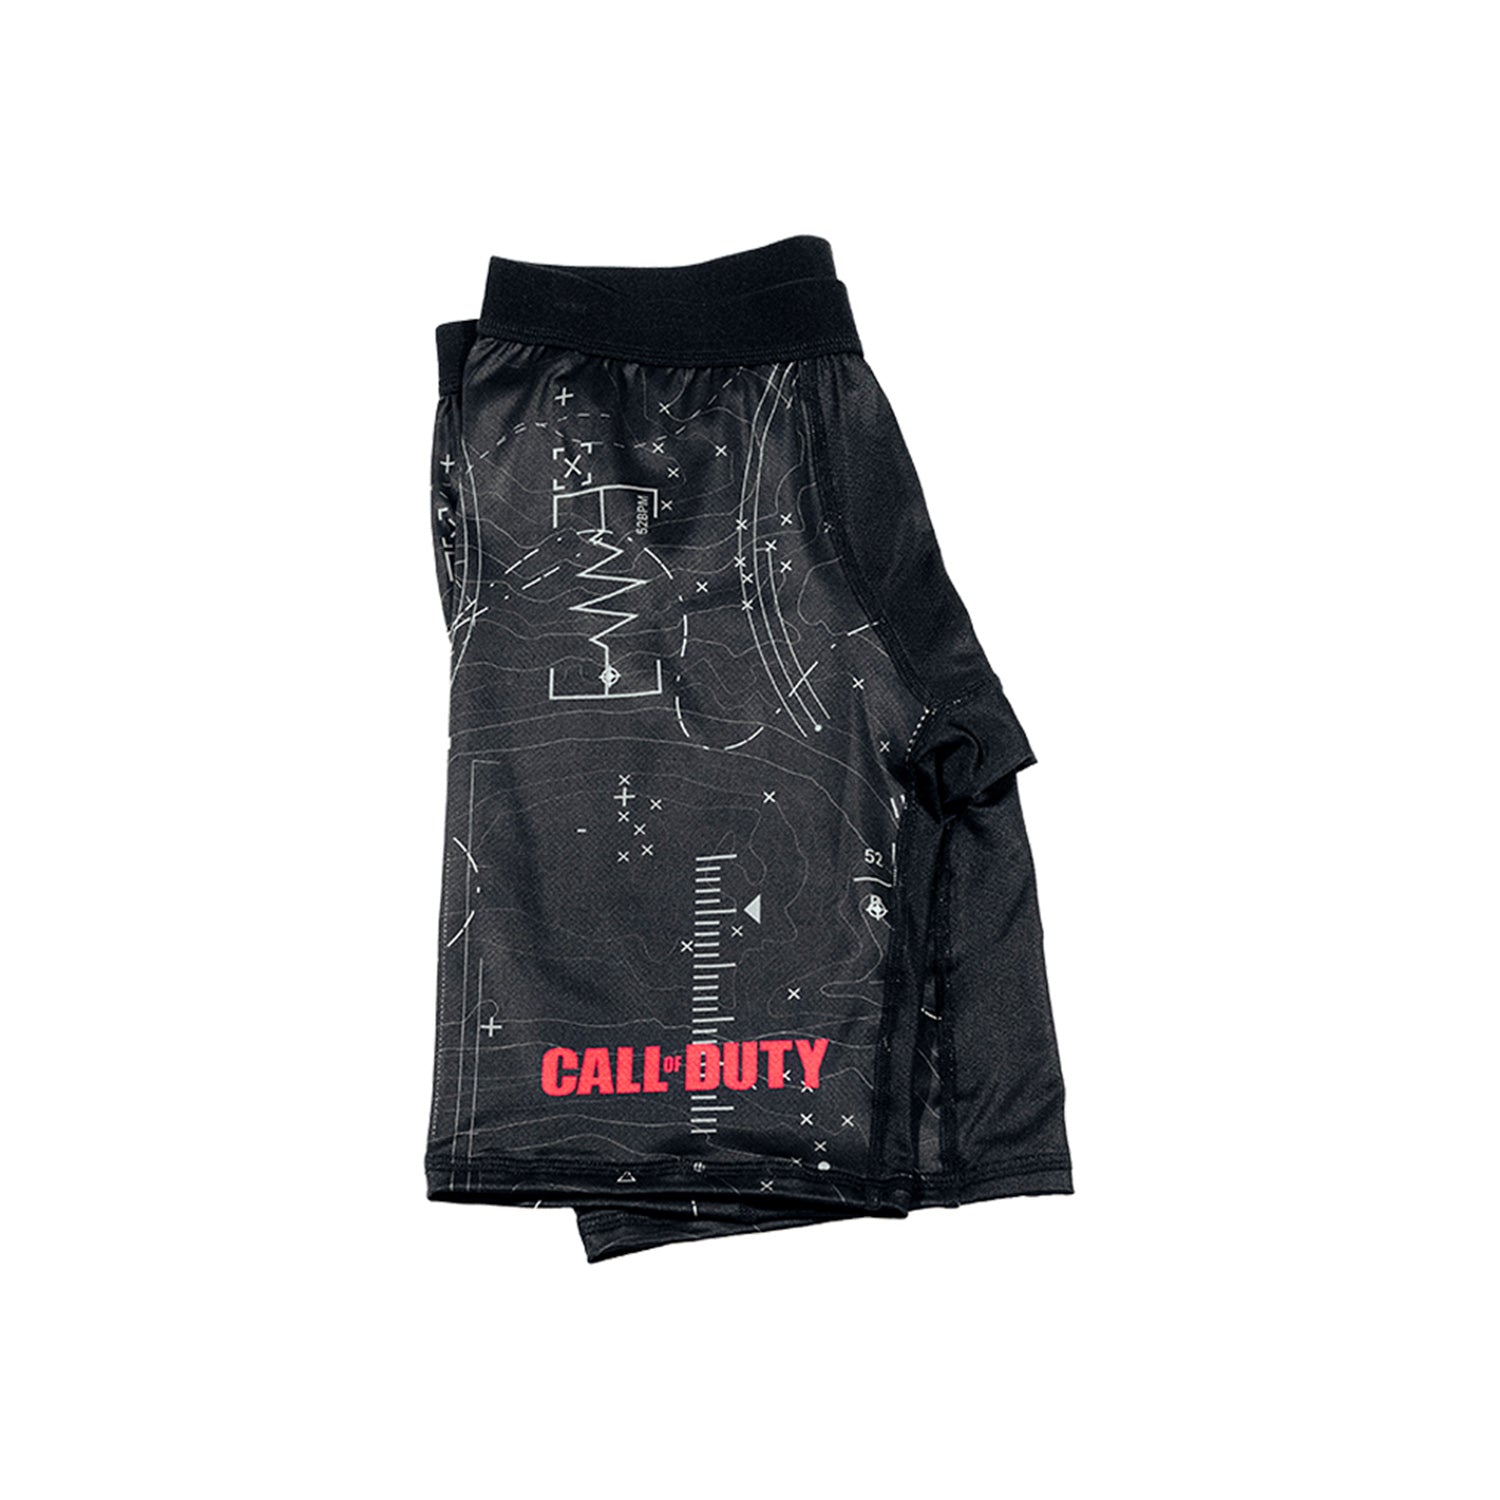 Call of Duty Point3 Black Topographic Compression Shorts - Folded View